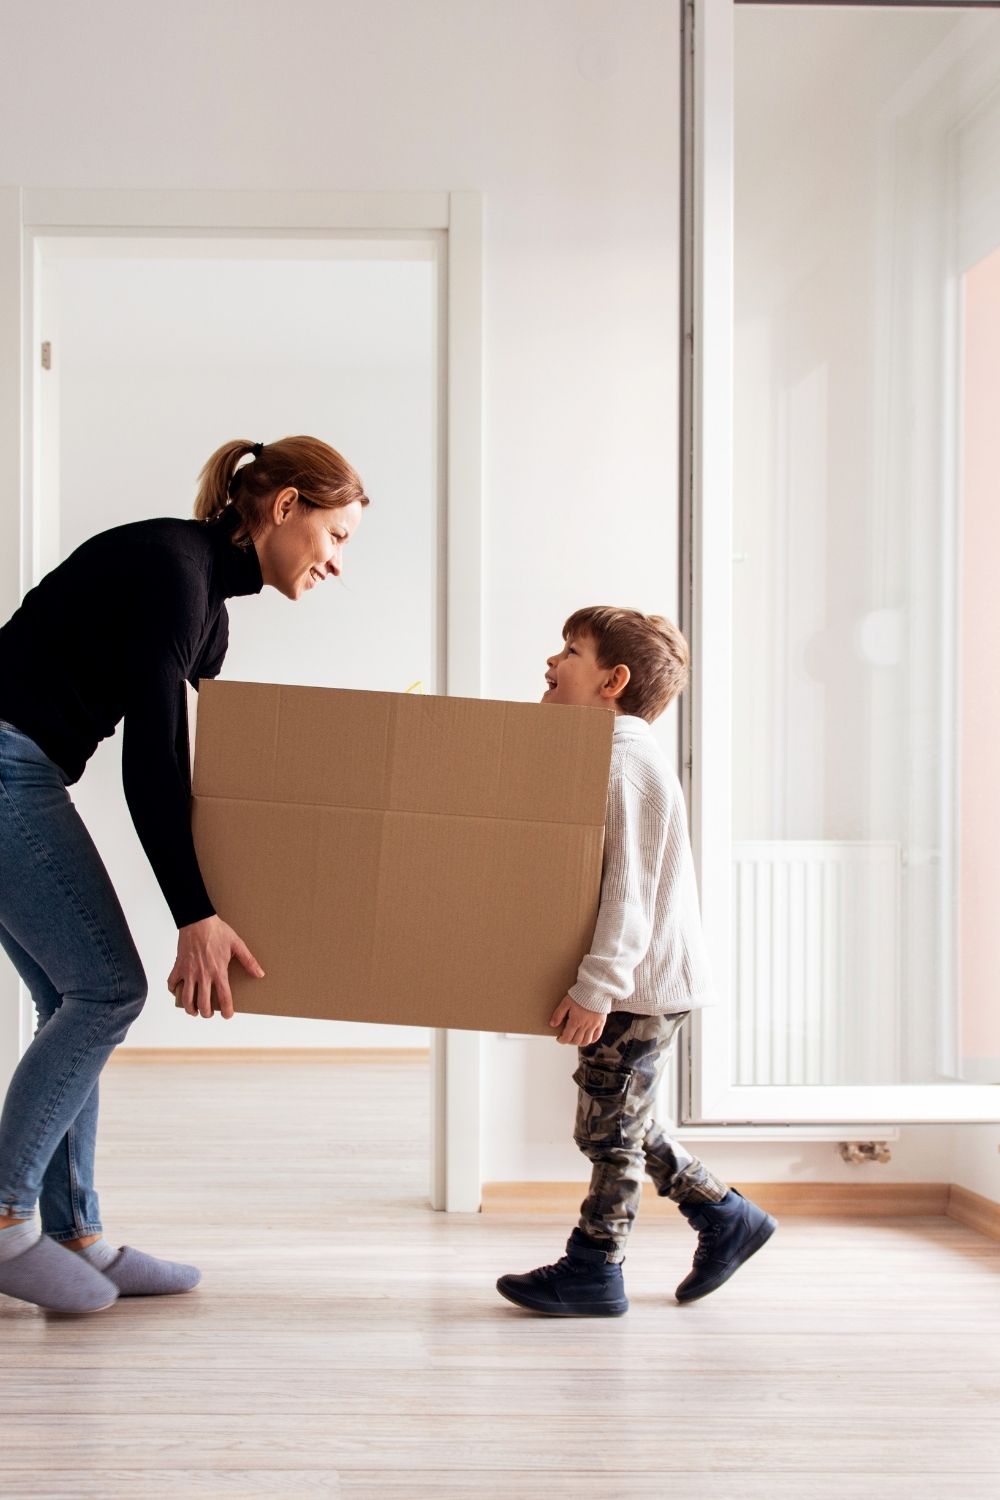 A Few Tips for Finding a New Home for Your Growing Family